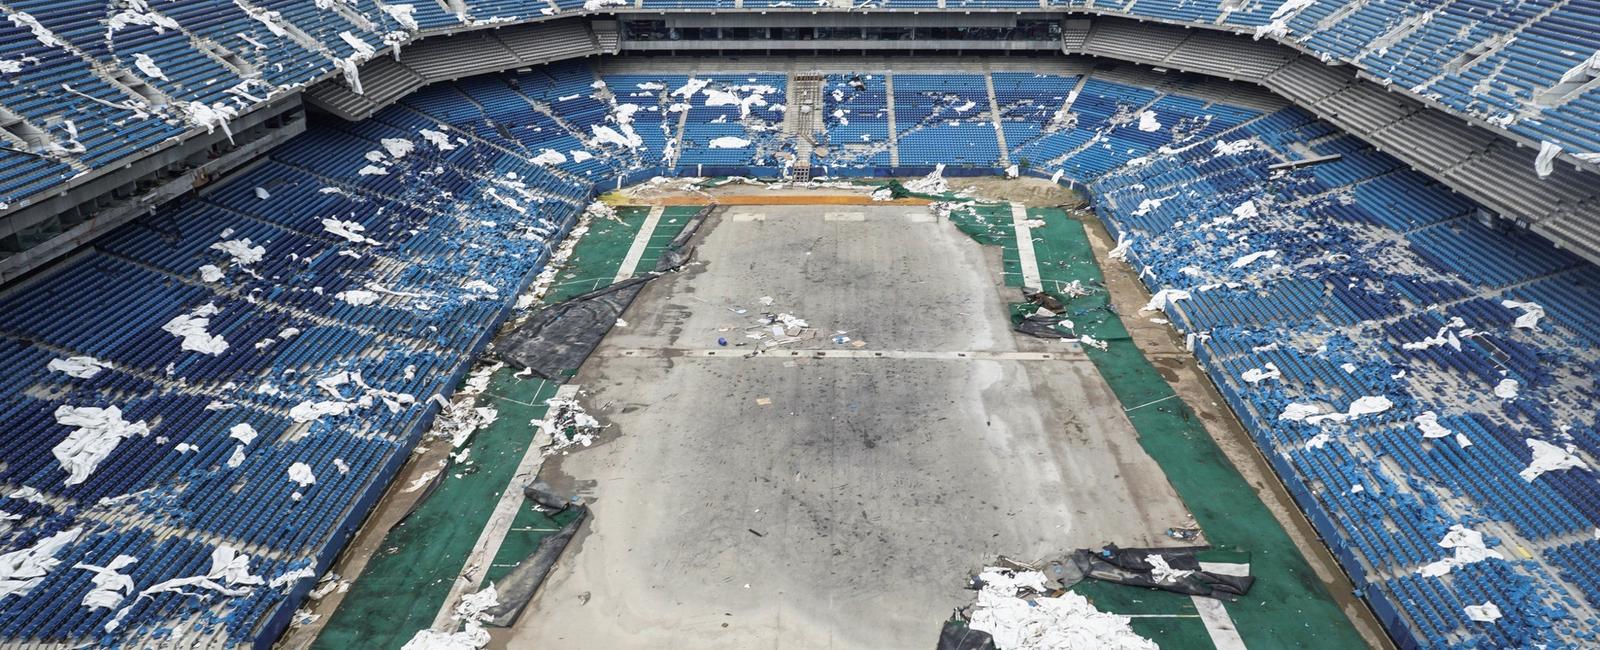 The largest nfl stadium is the pontiac silverdome in detroit michigan